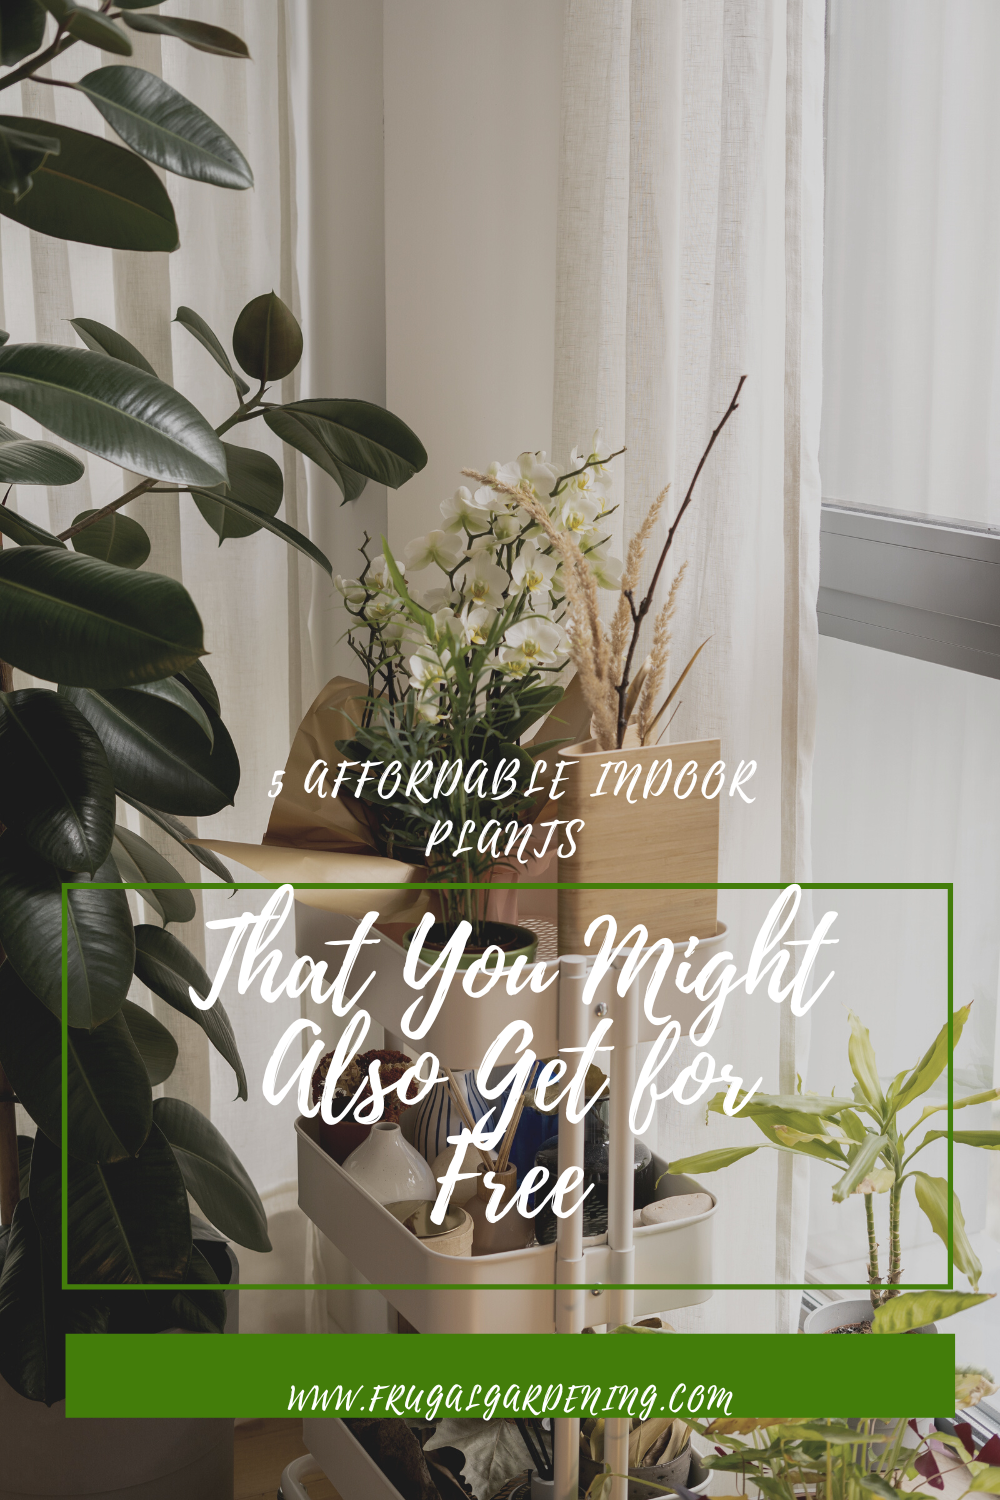 5 Affordable Indoor Plants That You Might Also Get for Free